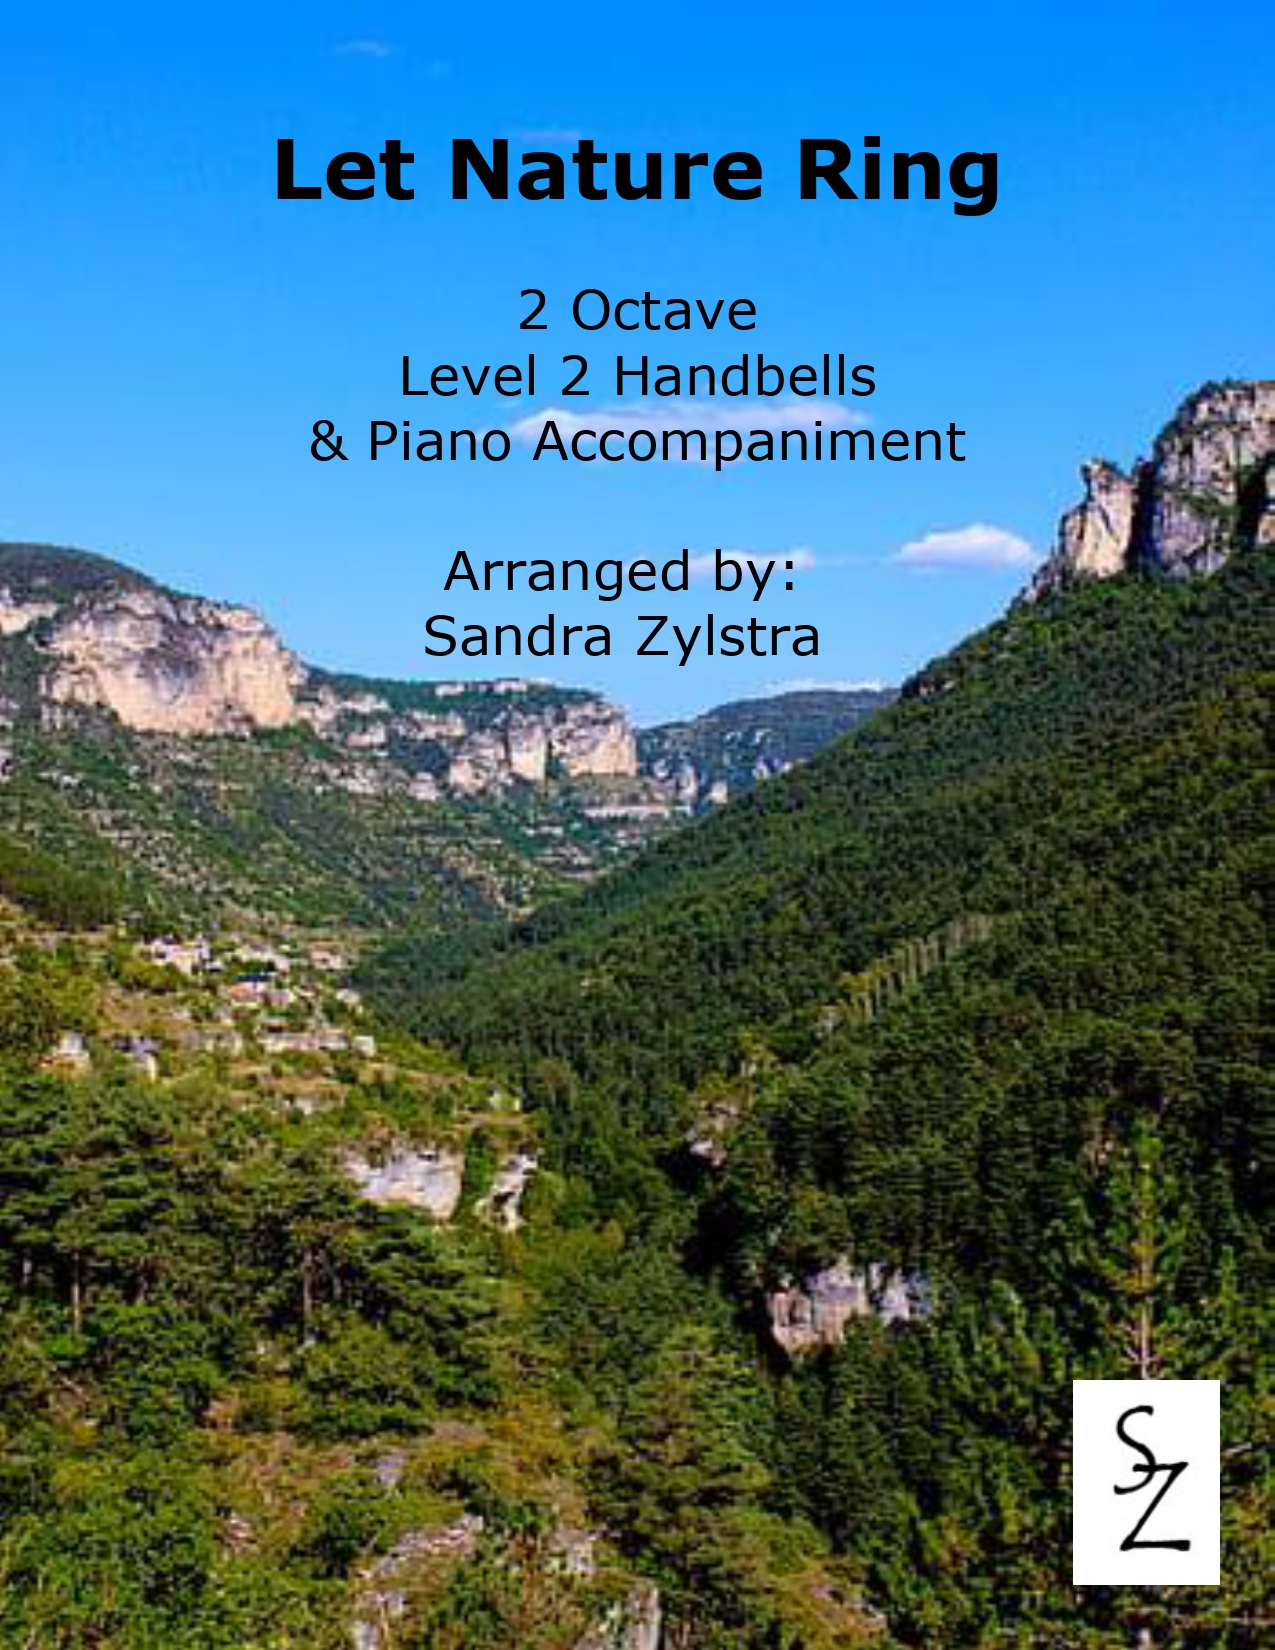 Let Nature Ring 2 octave handbell piano cover page 00011